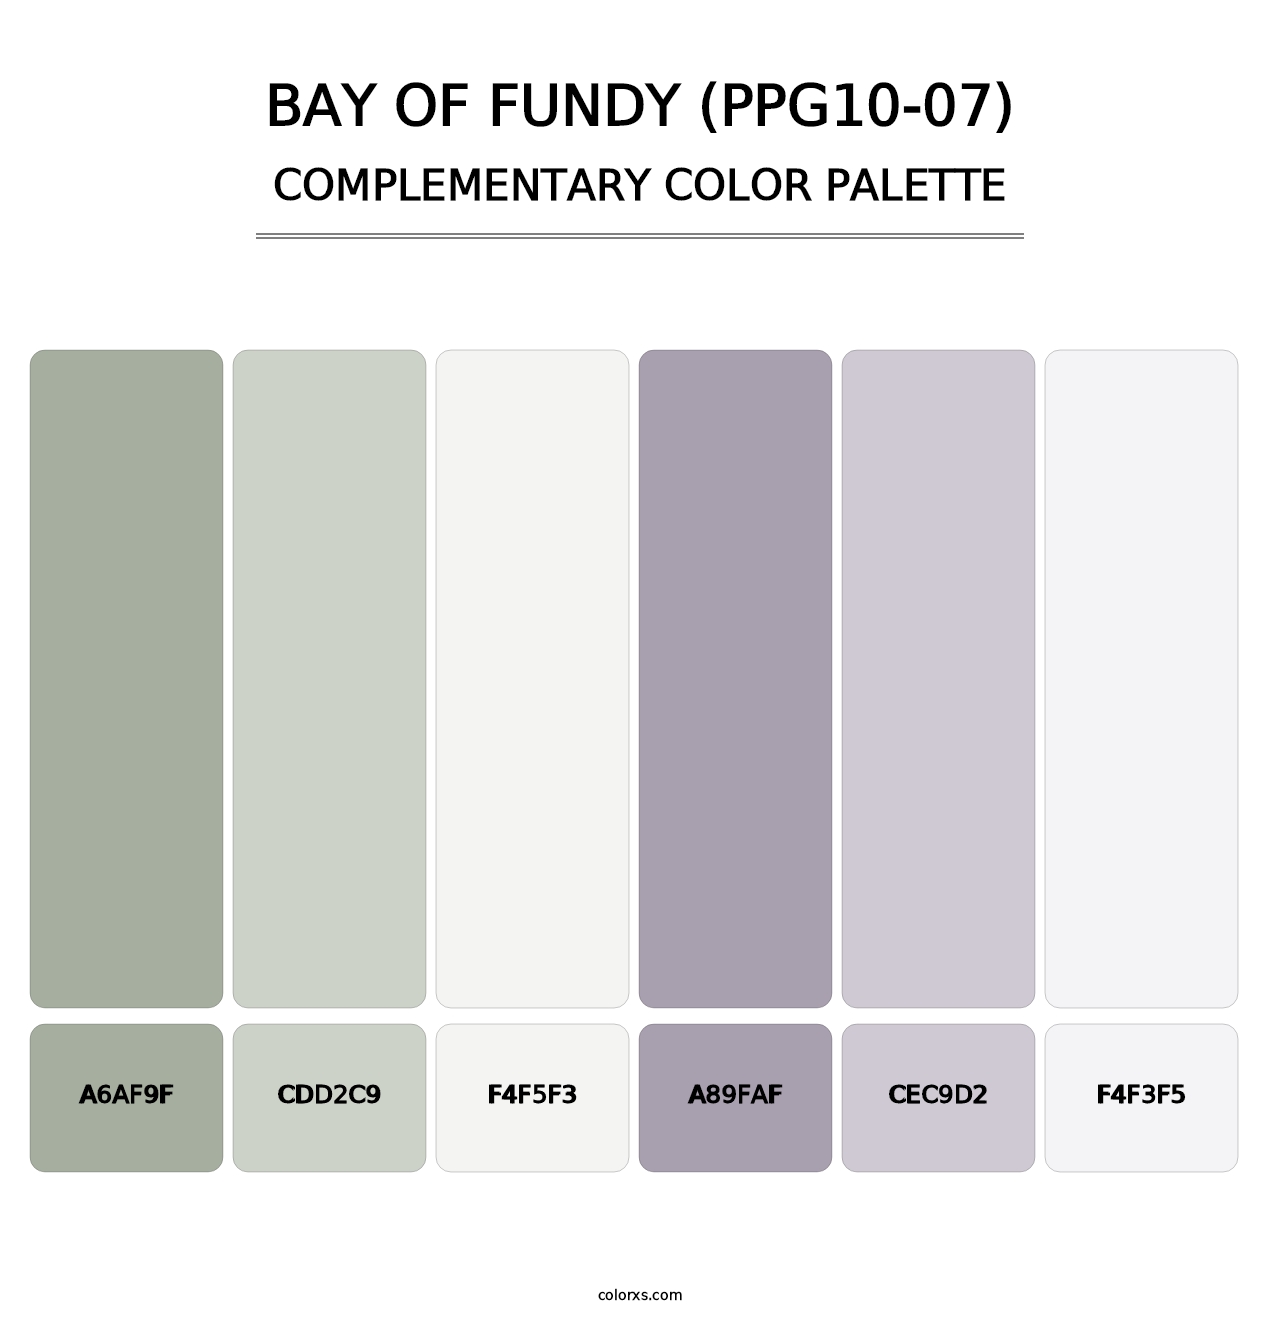 Bay Of Fundy (PPG10-07) - Complementary Color Palette